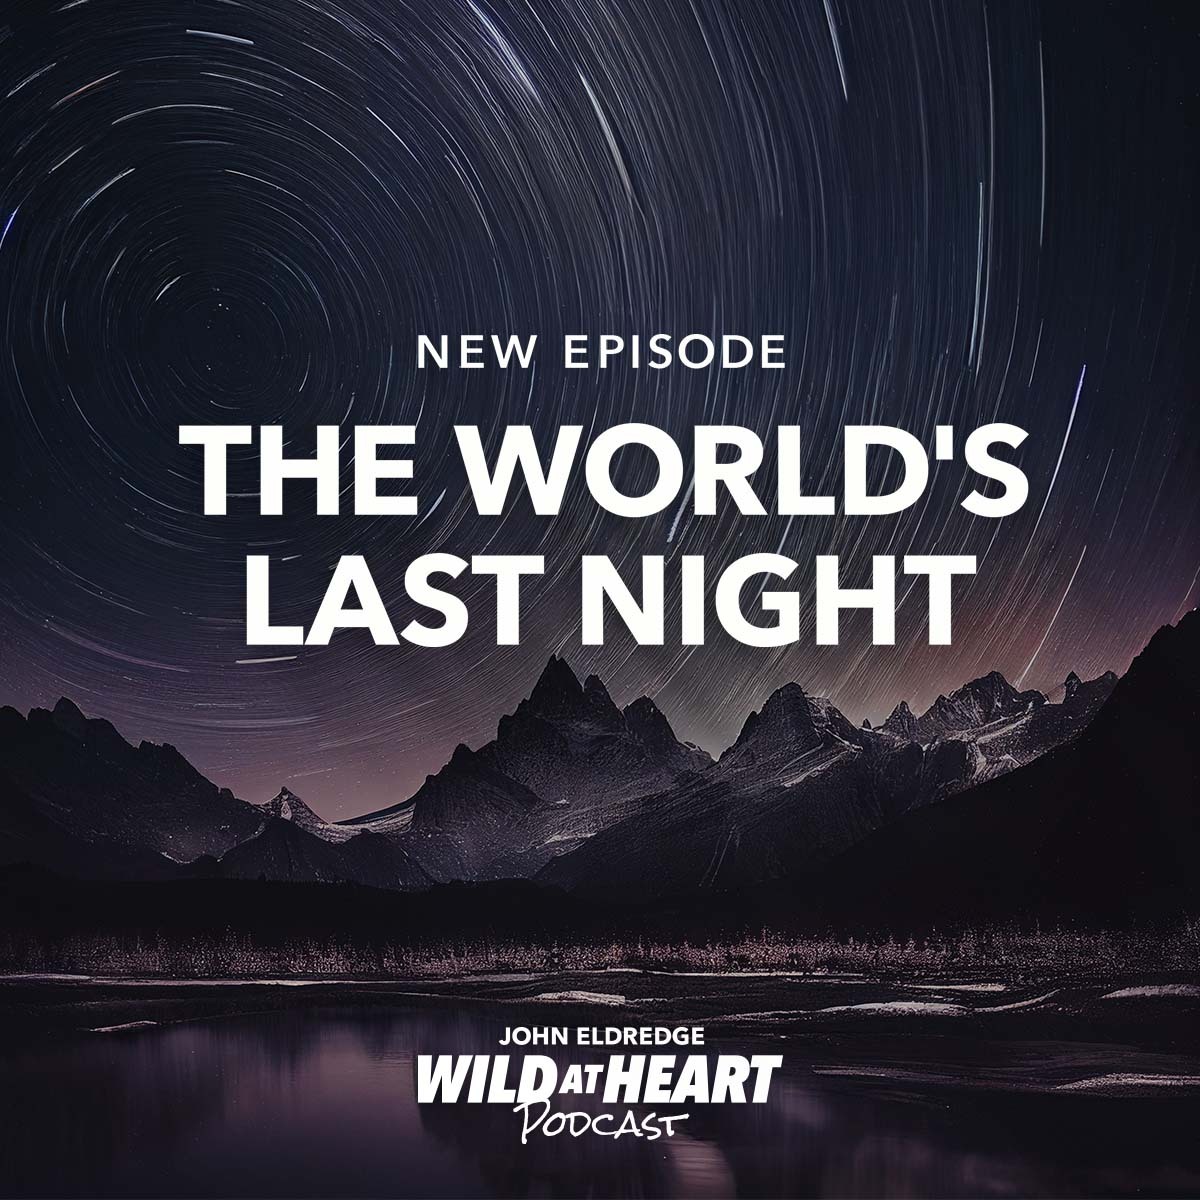 As the series continues, John invites some of the Wild at Heart team into the studio to answer this question: How would you live if you knew tonight was the last night? bit.ly/wahlastnight #wildatheart #johneldredge #lastnightonearth